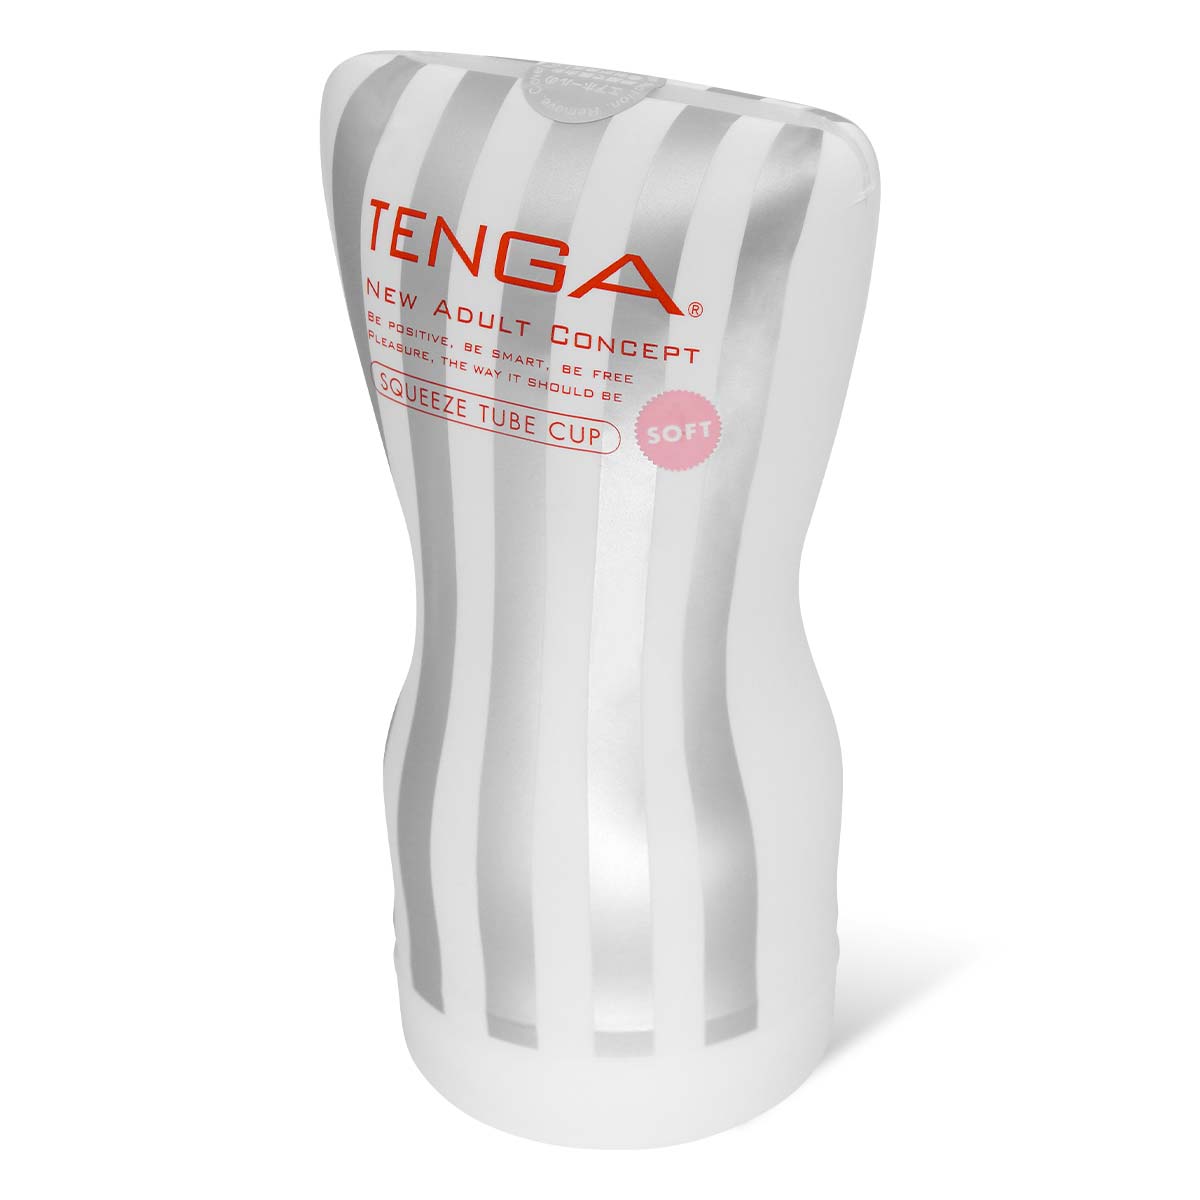 TENGA SQUEEZE TUBE CUP 2nd Generation SOFT-p_1